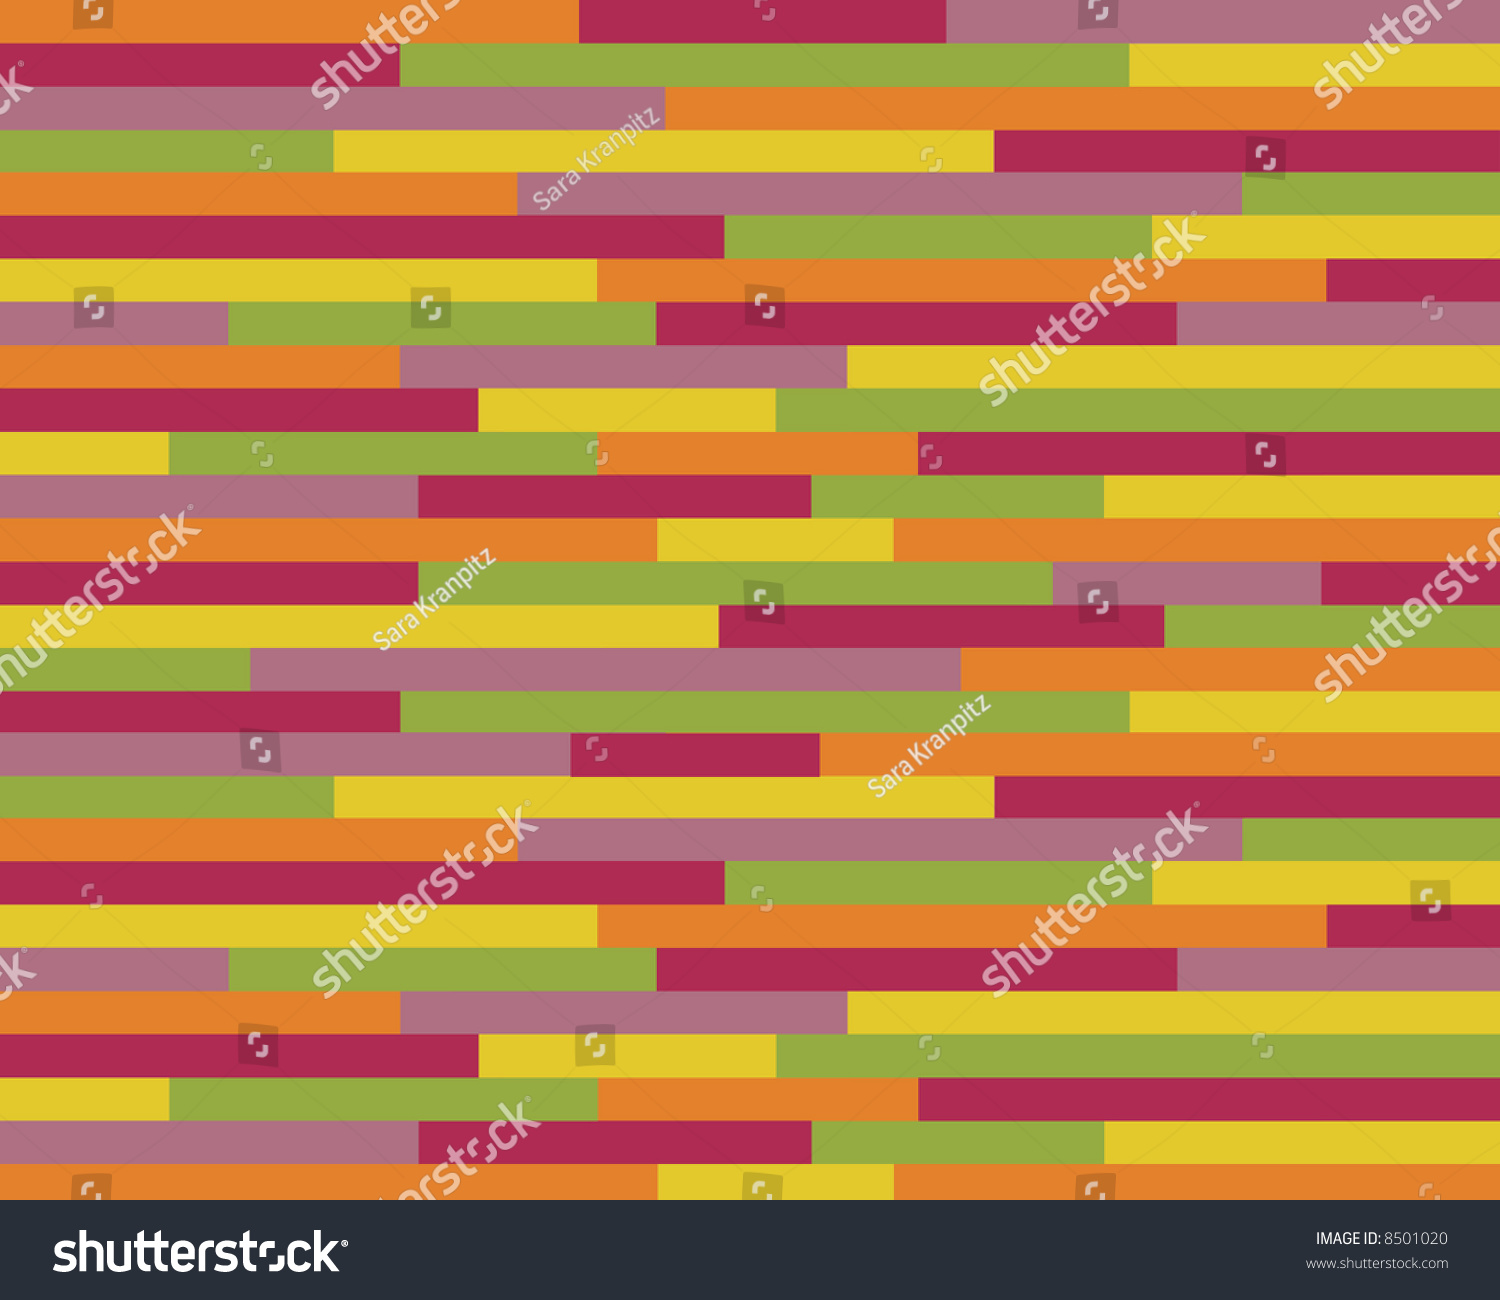 Cute multi colored horizontal striped pattern Vector Image